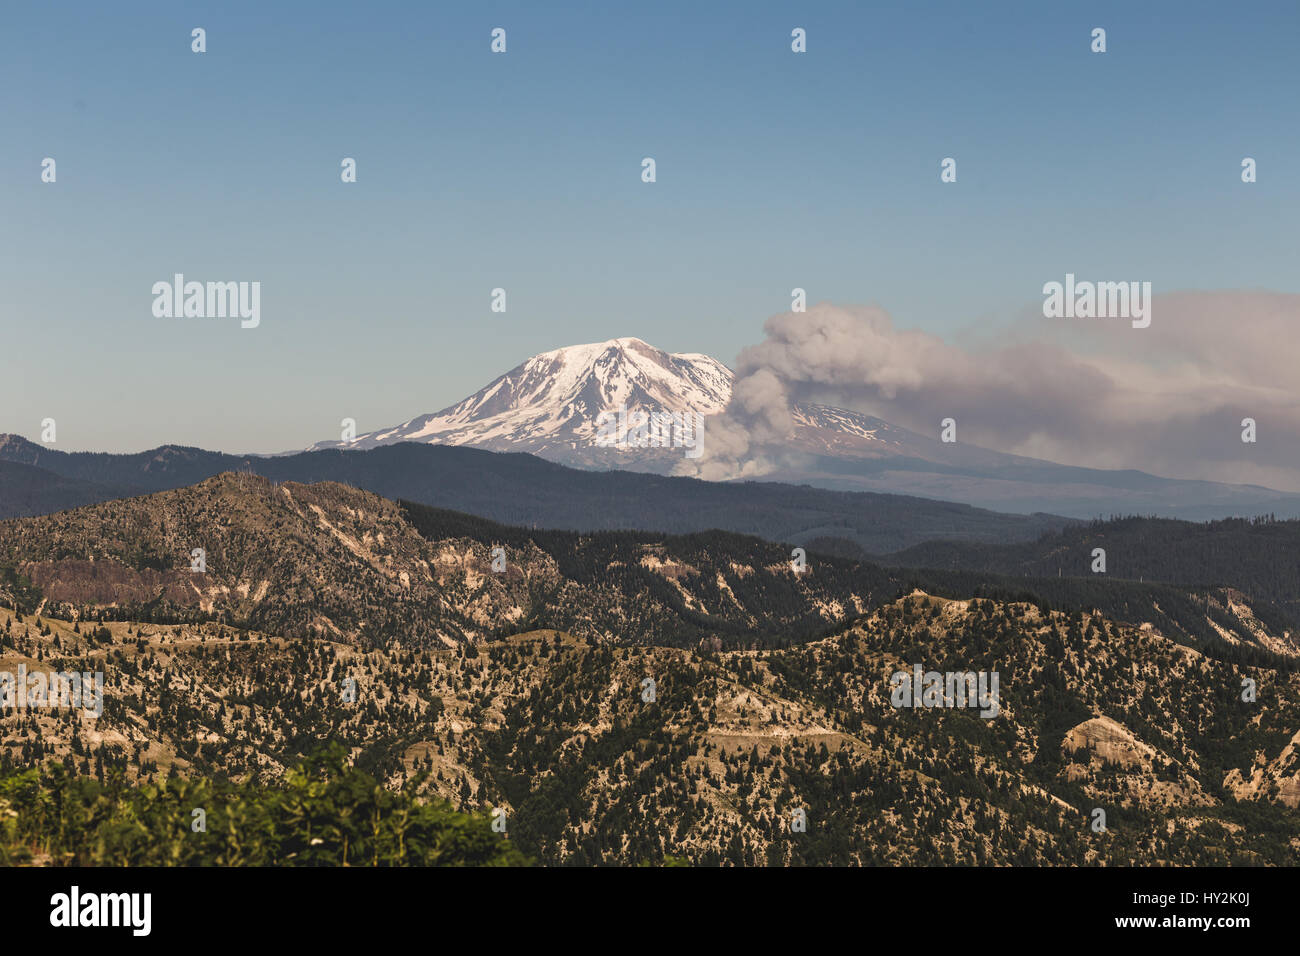 Smoke from a forest fire in front of Mount Adams in Washington, USA. Sunny summer day under blue sky. Stock Photo